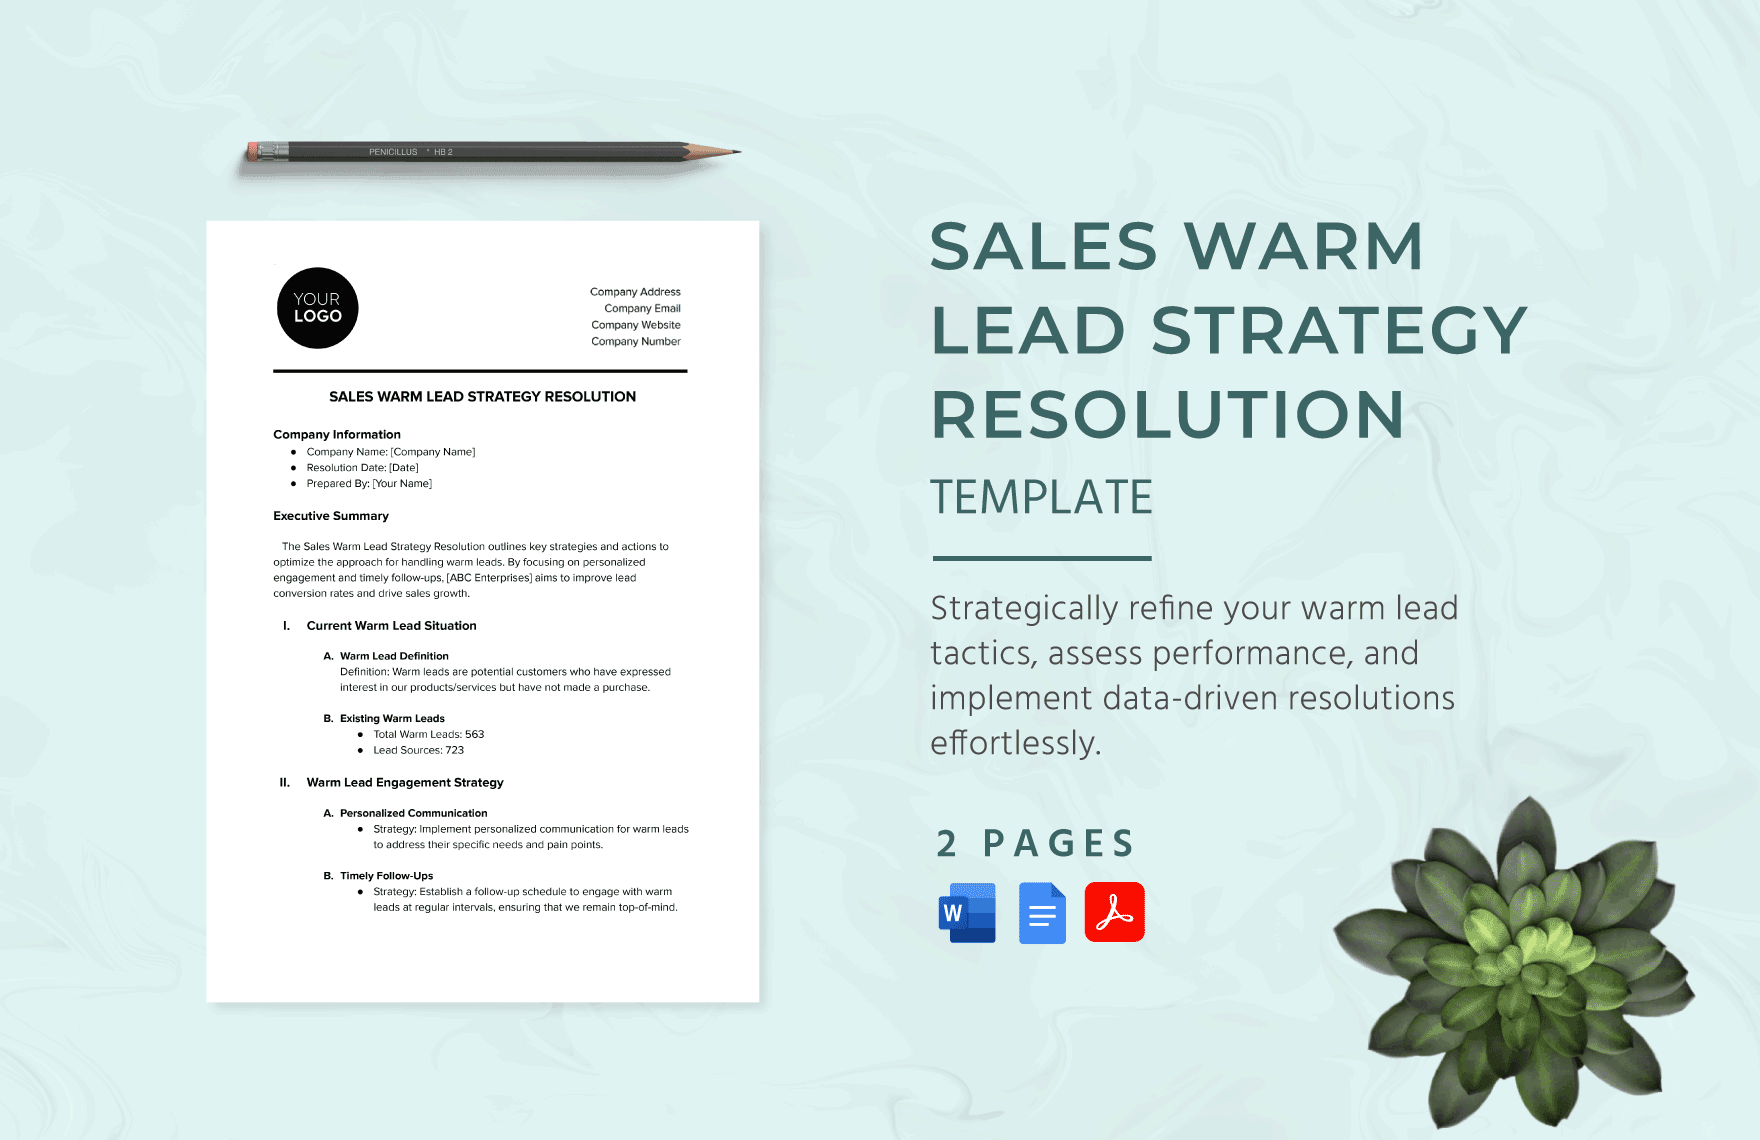 Sales Warm Lead Strategy Resolution Template in Word, Google Docs, PDF